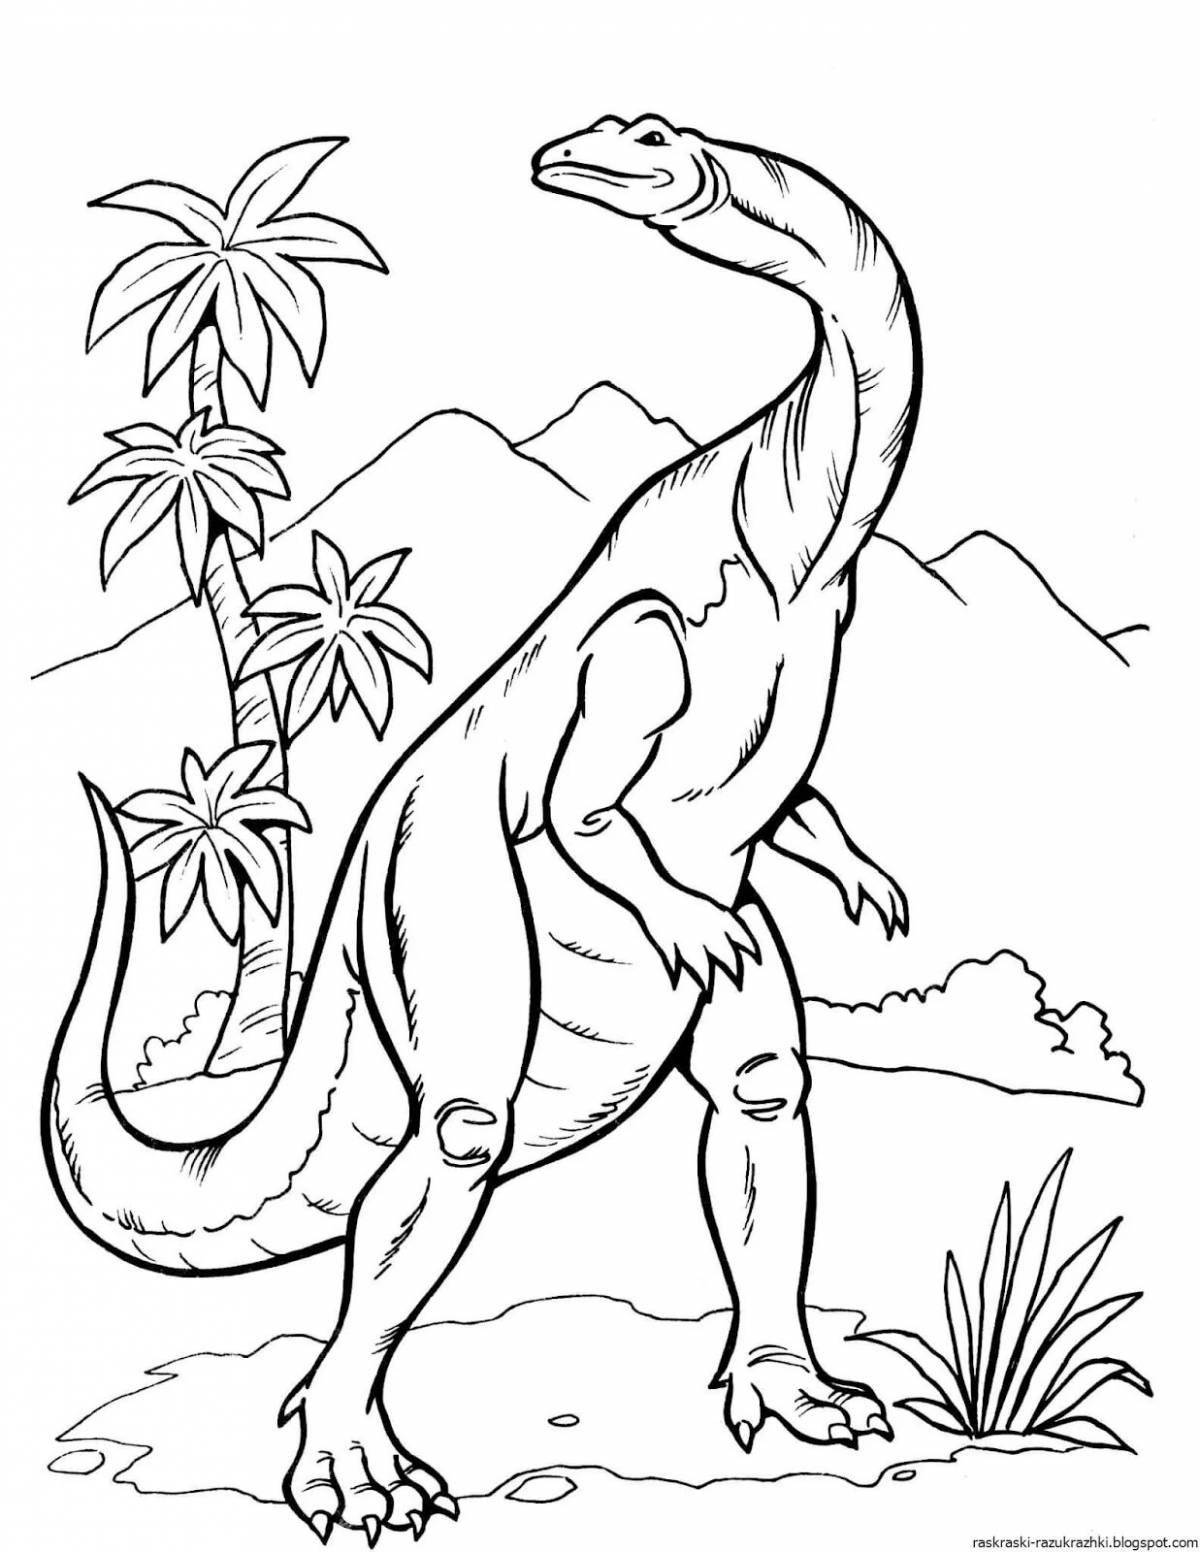 Funny dinosaur coloring pages for boys 6-7 years old